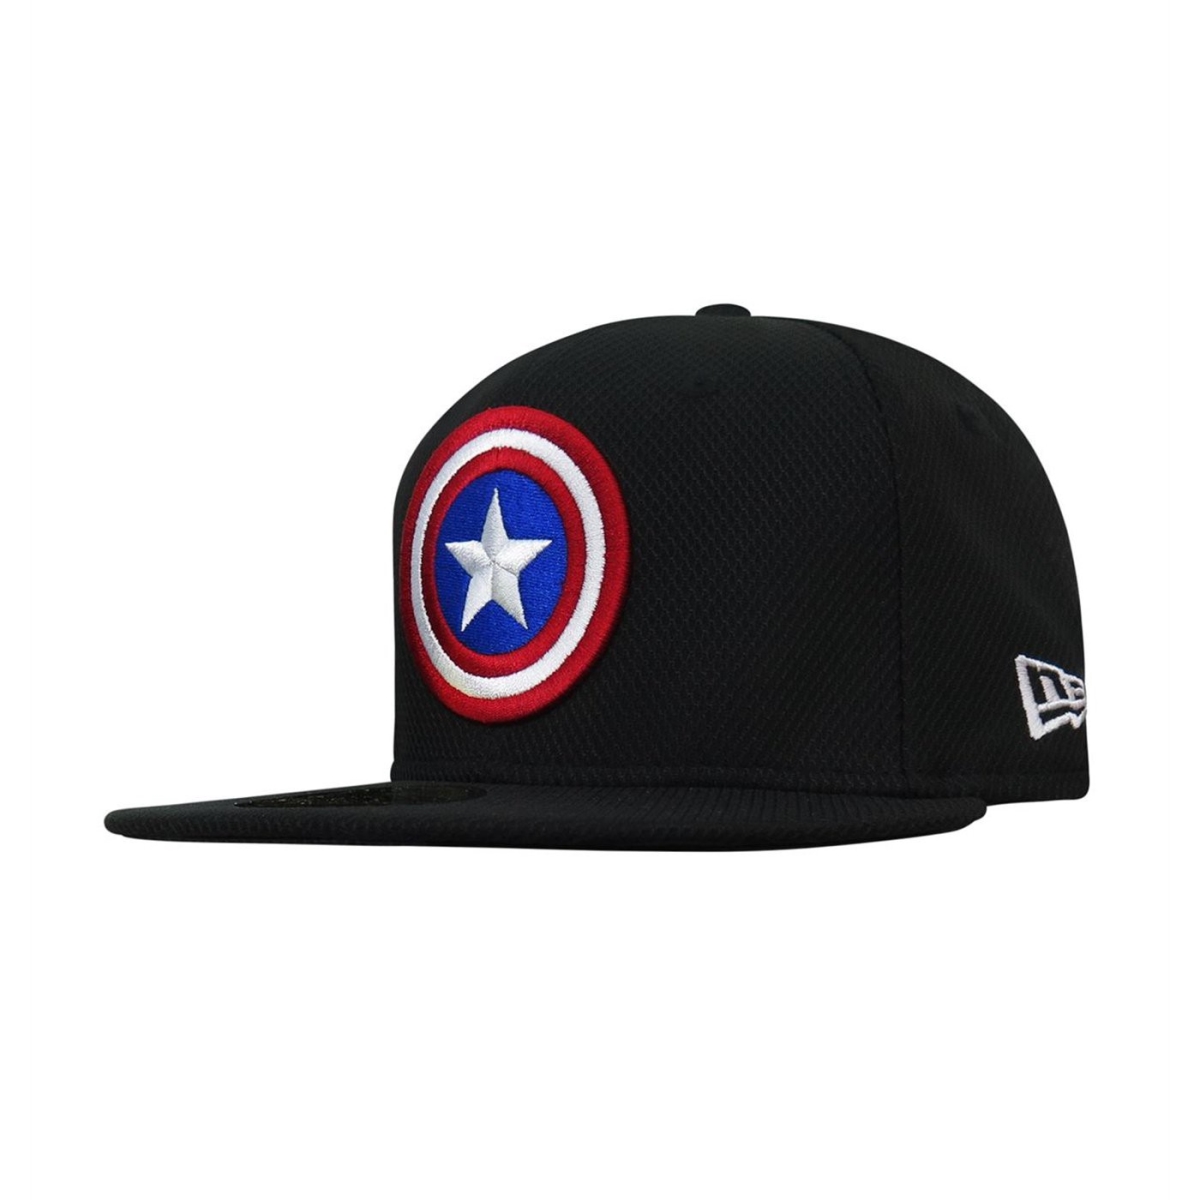 Picture of Captain America hatcapshldsym5950-8-8 Fitted Captain America Shield Black 59Fifty Fitted Hat - Size 8